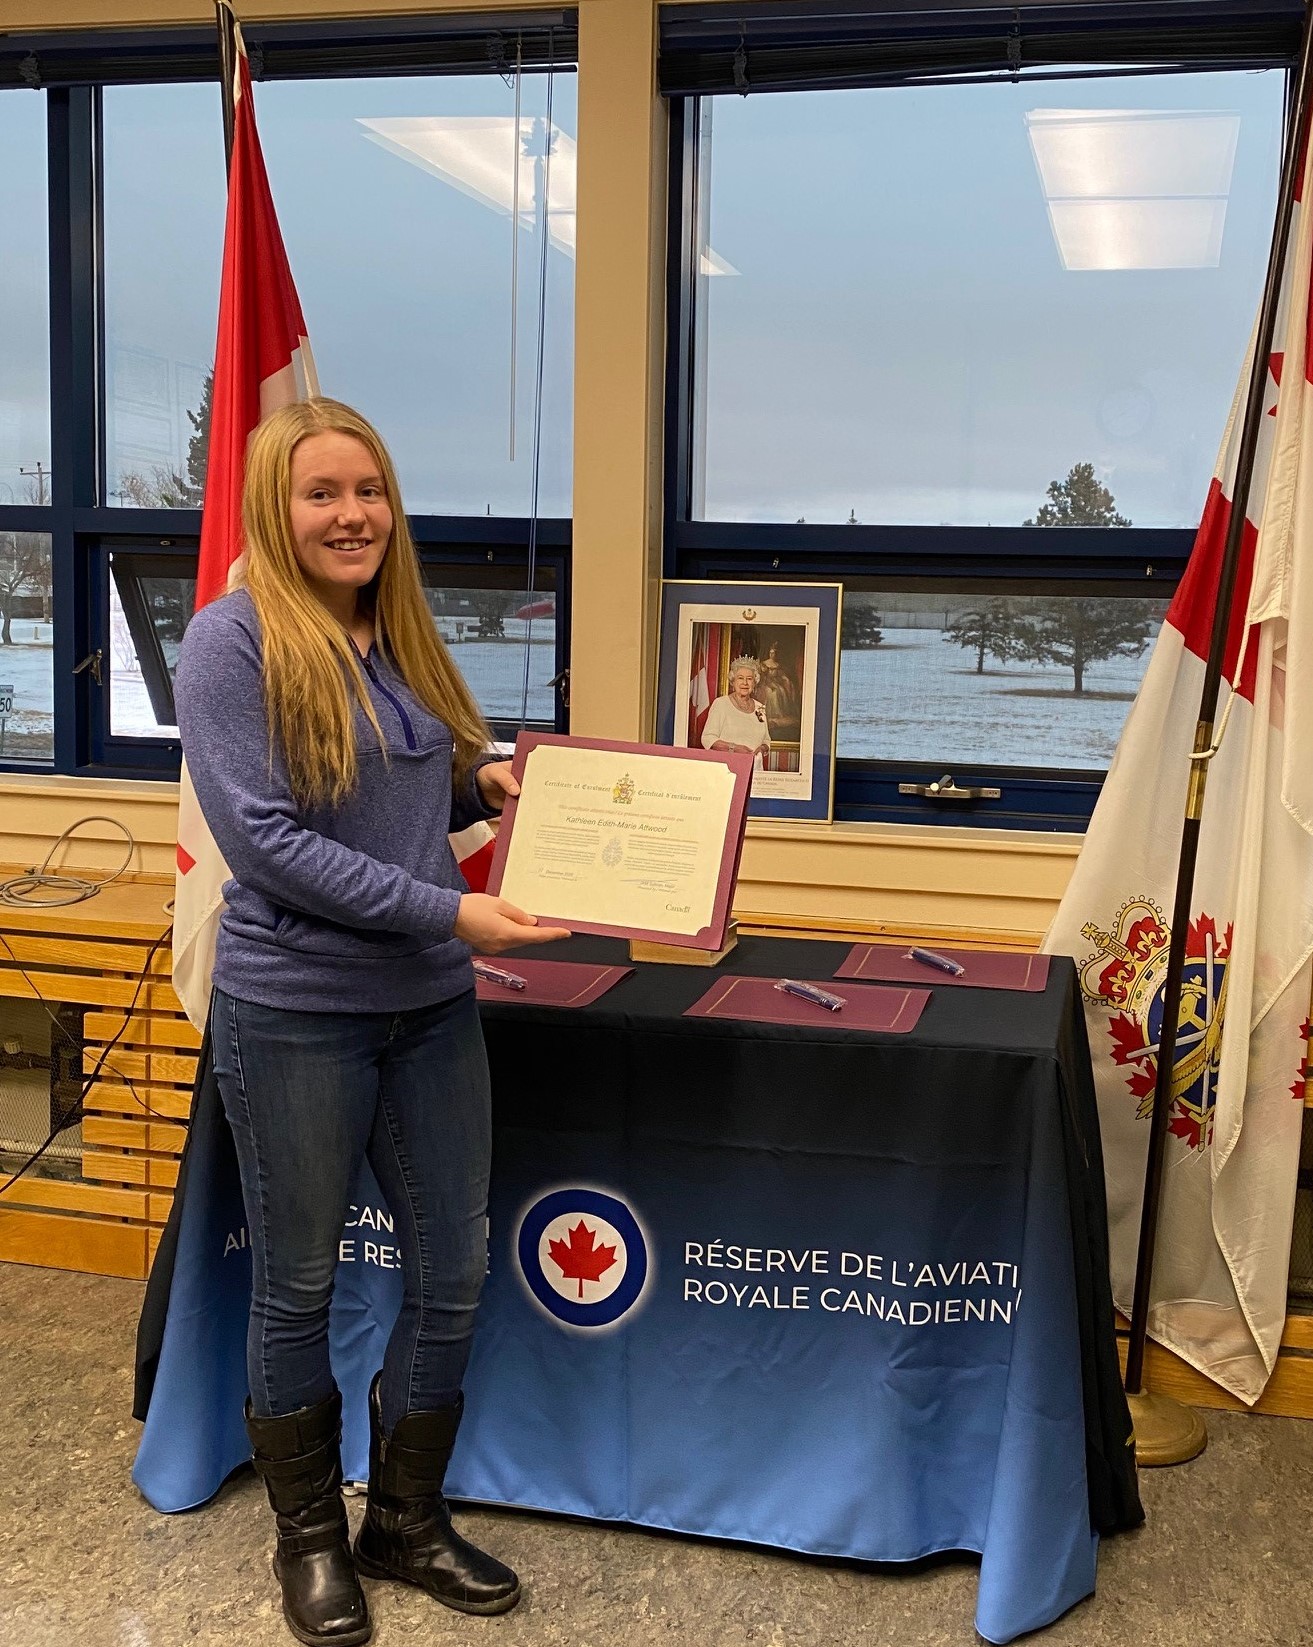 Aviator Kathleen Attwood is 4 Wing’s first applicant enrolled into the new RCAF Reserve occupation, Air Operations Support Technician.
Photo: Master Warrant Officer Patricia Schwindt, 4 RCAF Reserve Flight.